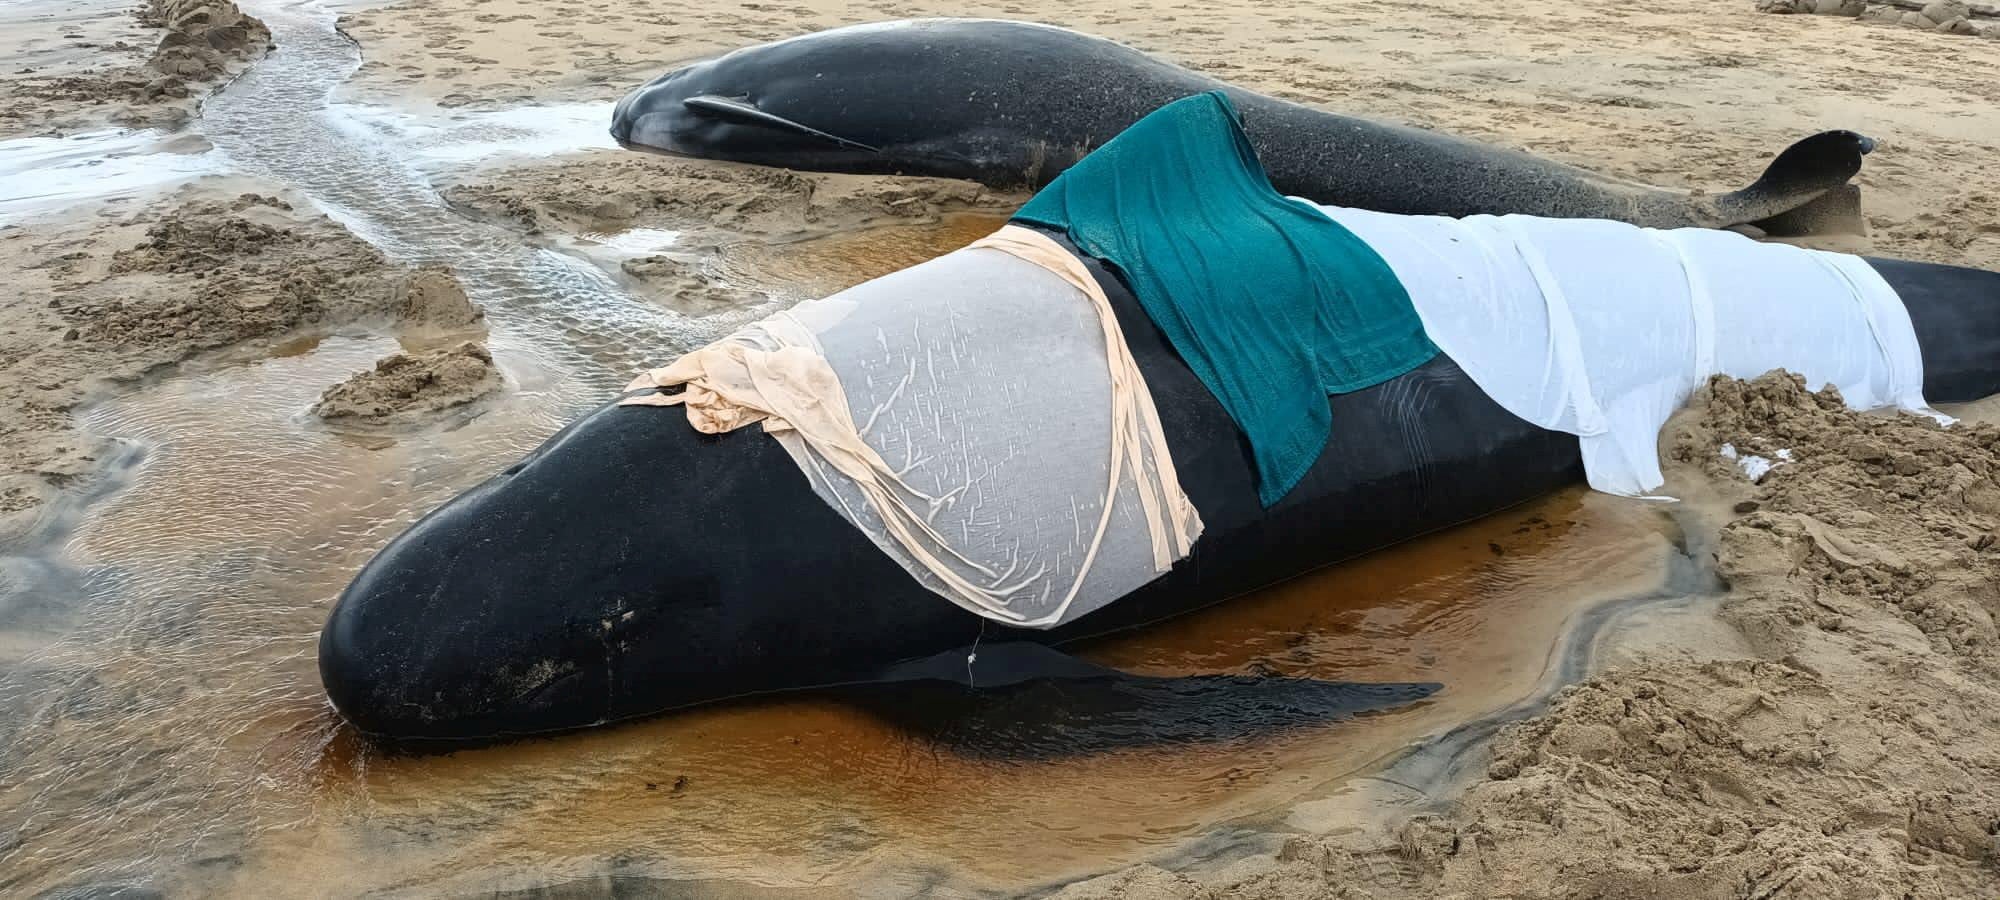 The living whales were covered in blankets to keep them wet